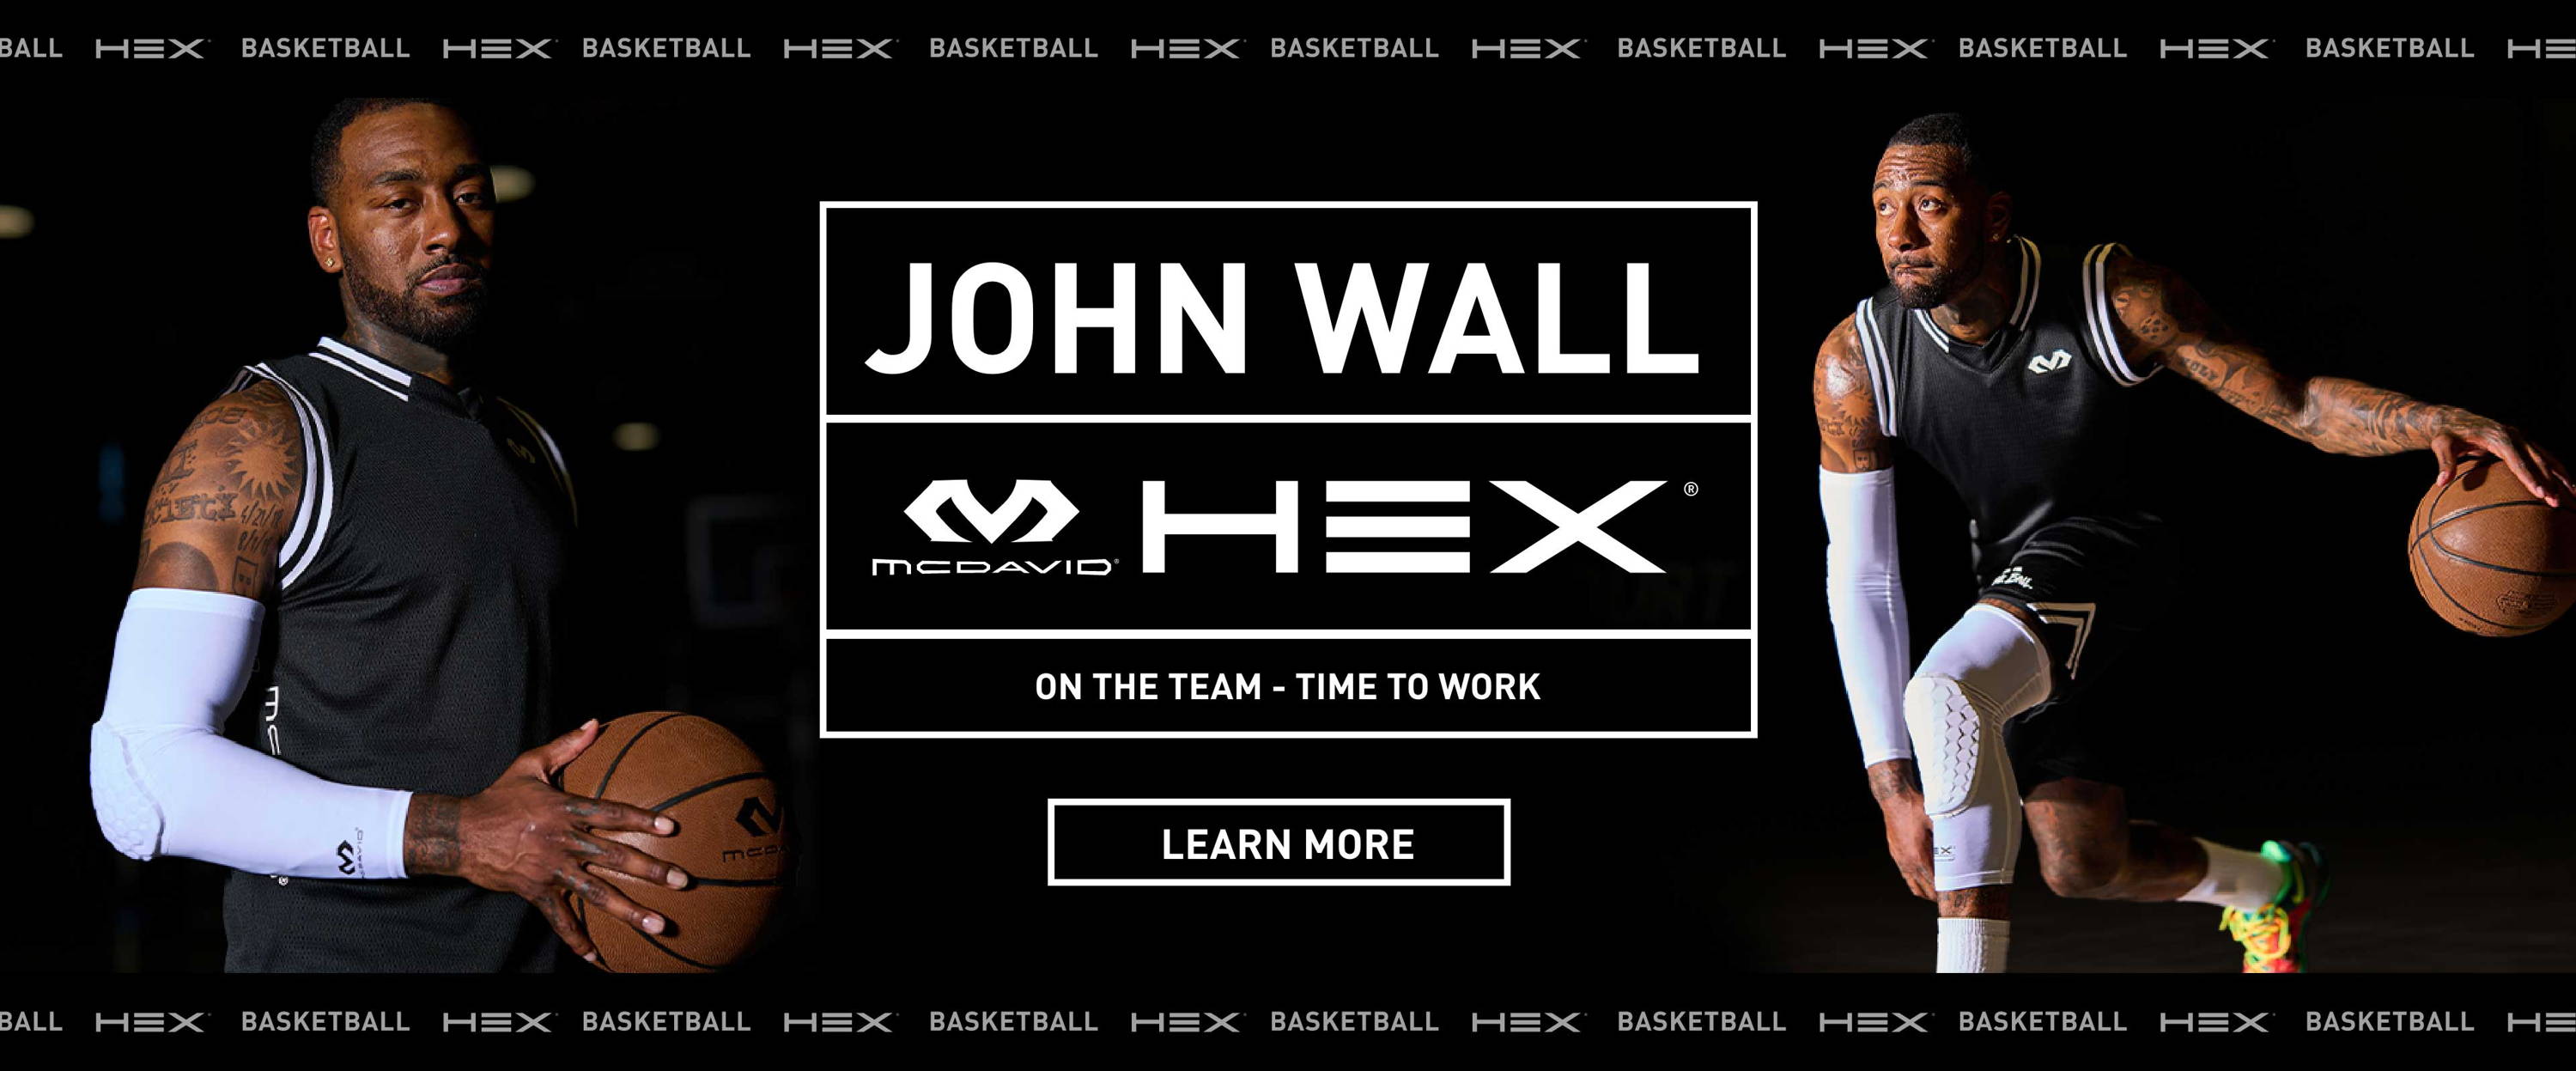 John Wall - McDavid HEX - On The Team - Time To Work - Learn More